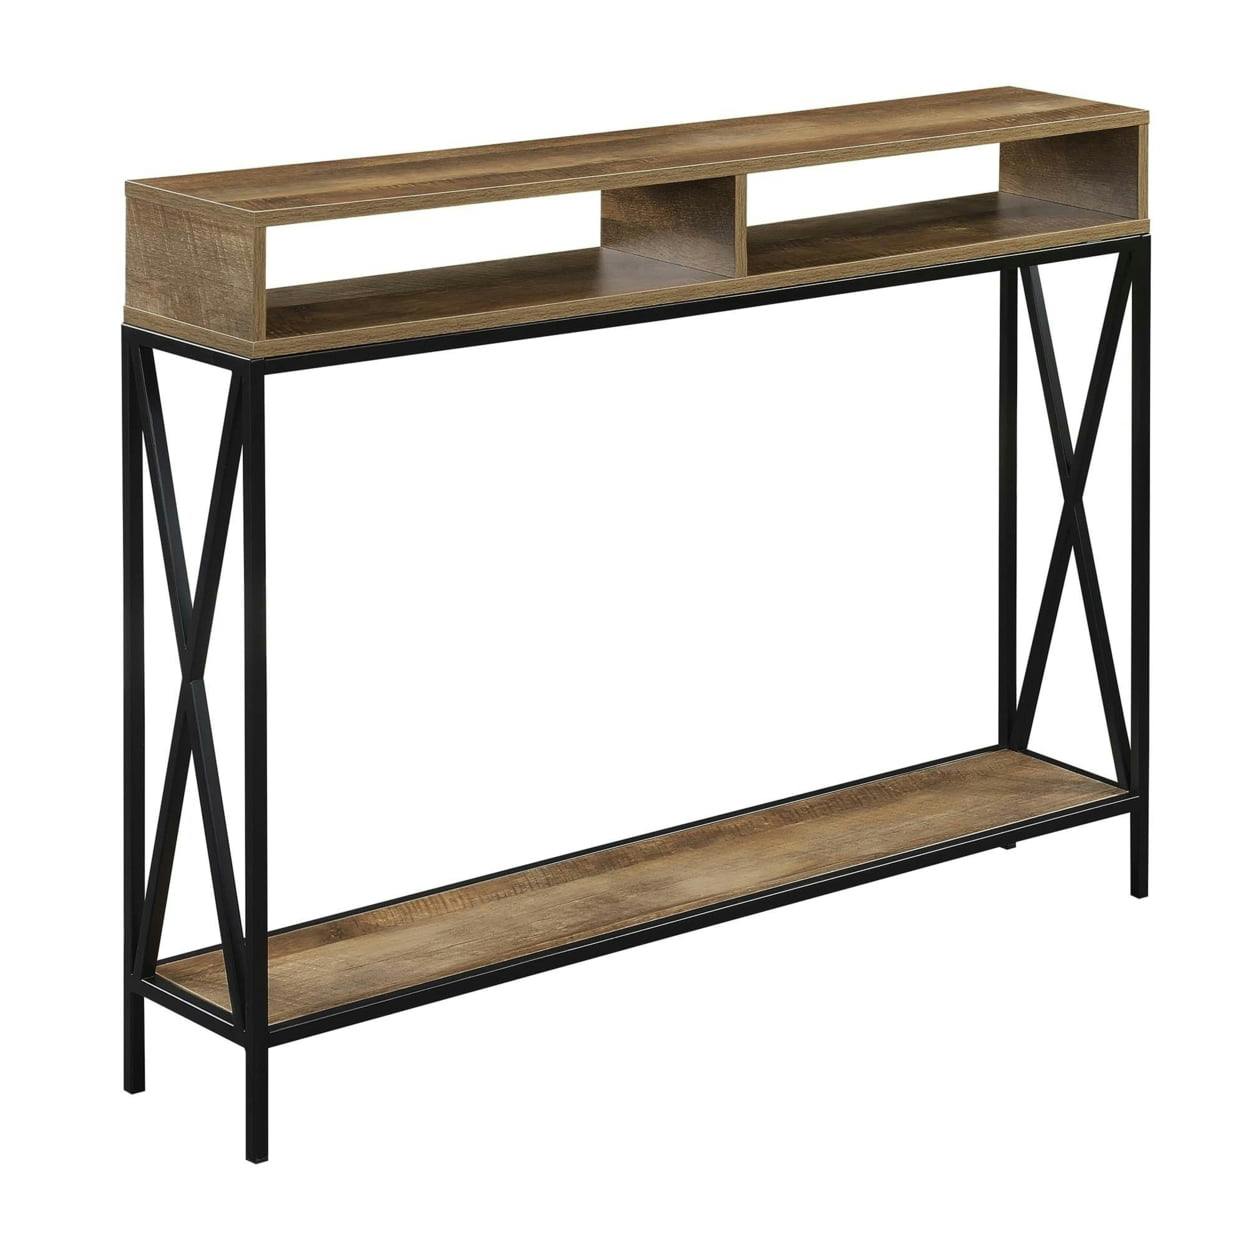 Nutmeg Wood & Black Metal Deluxe Console Table with Storage Shelf